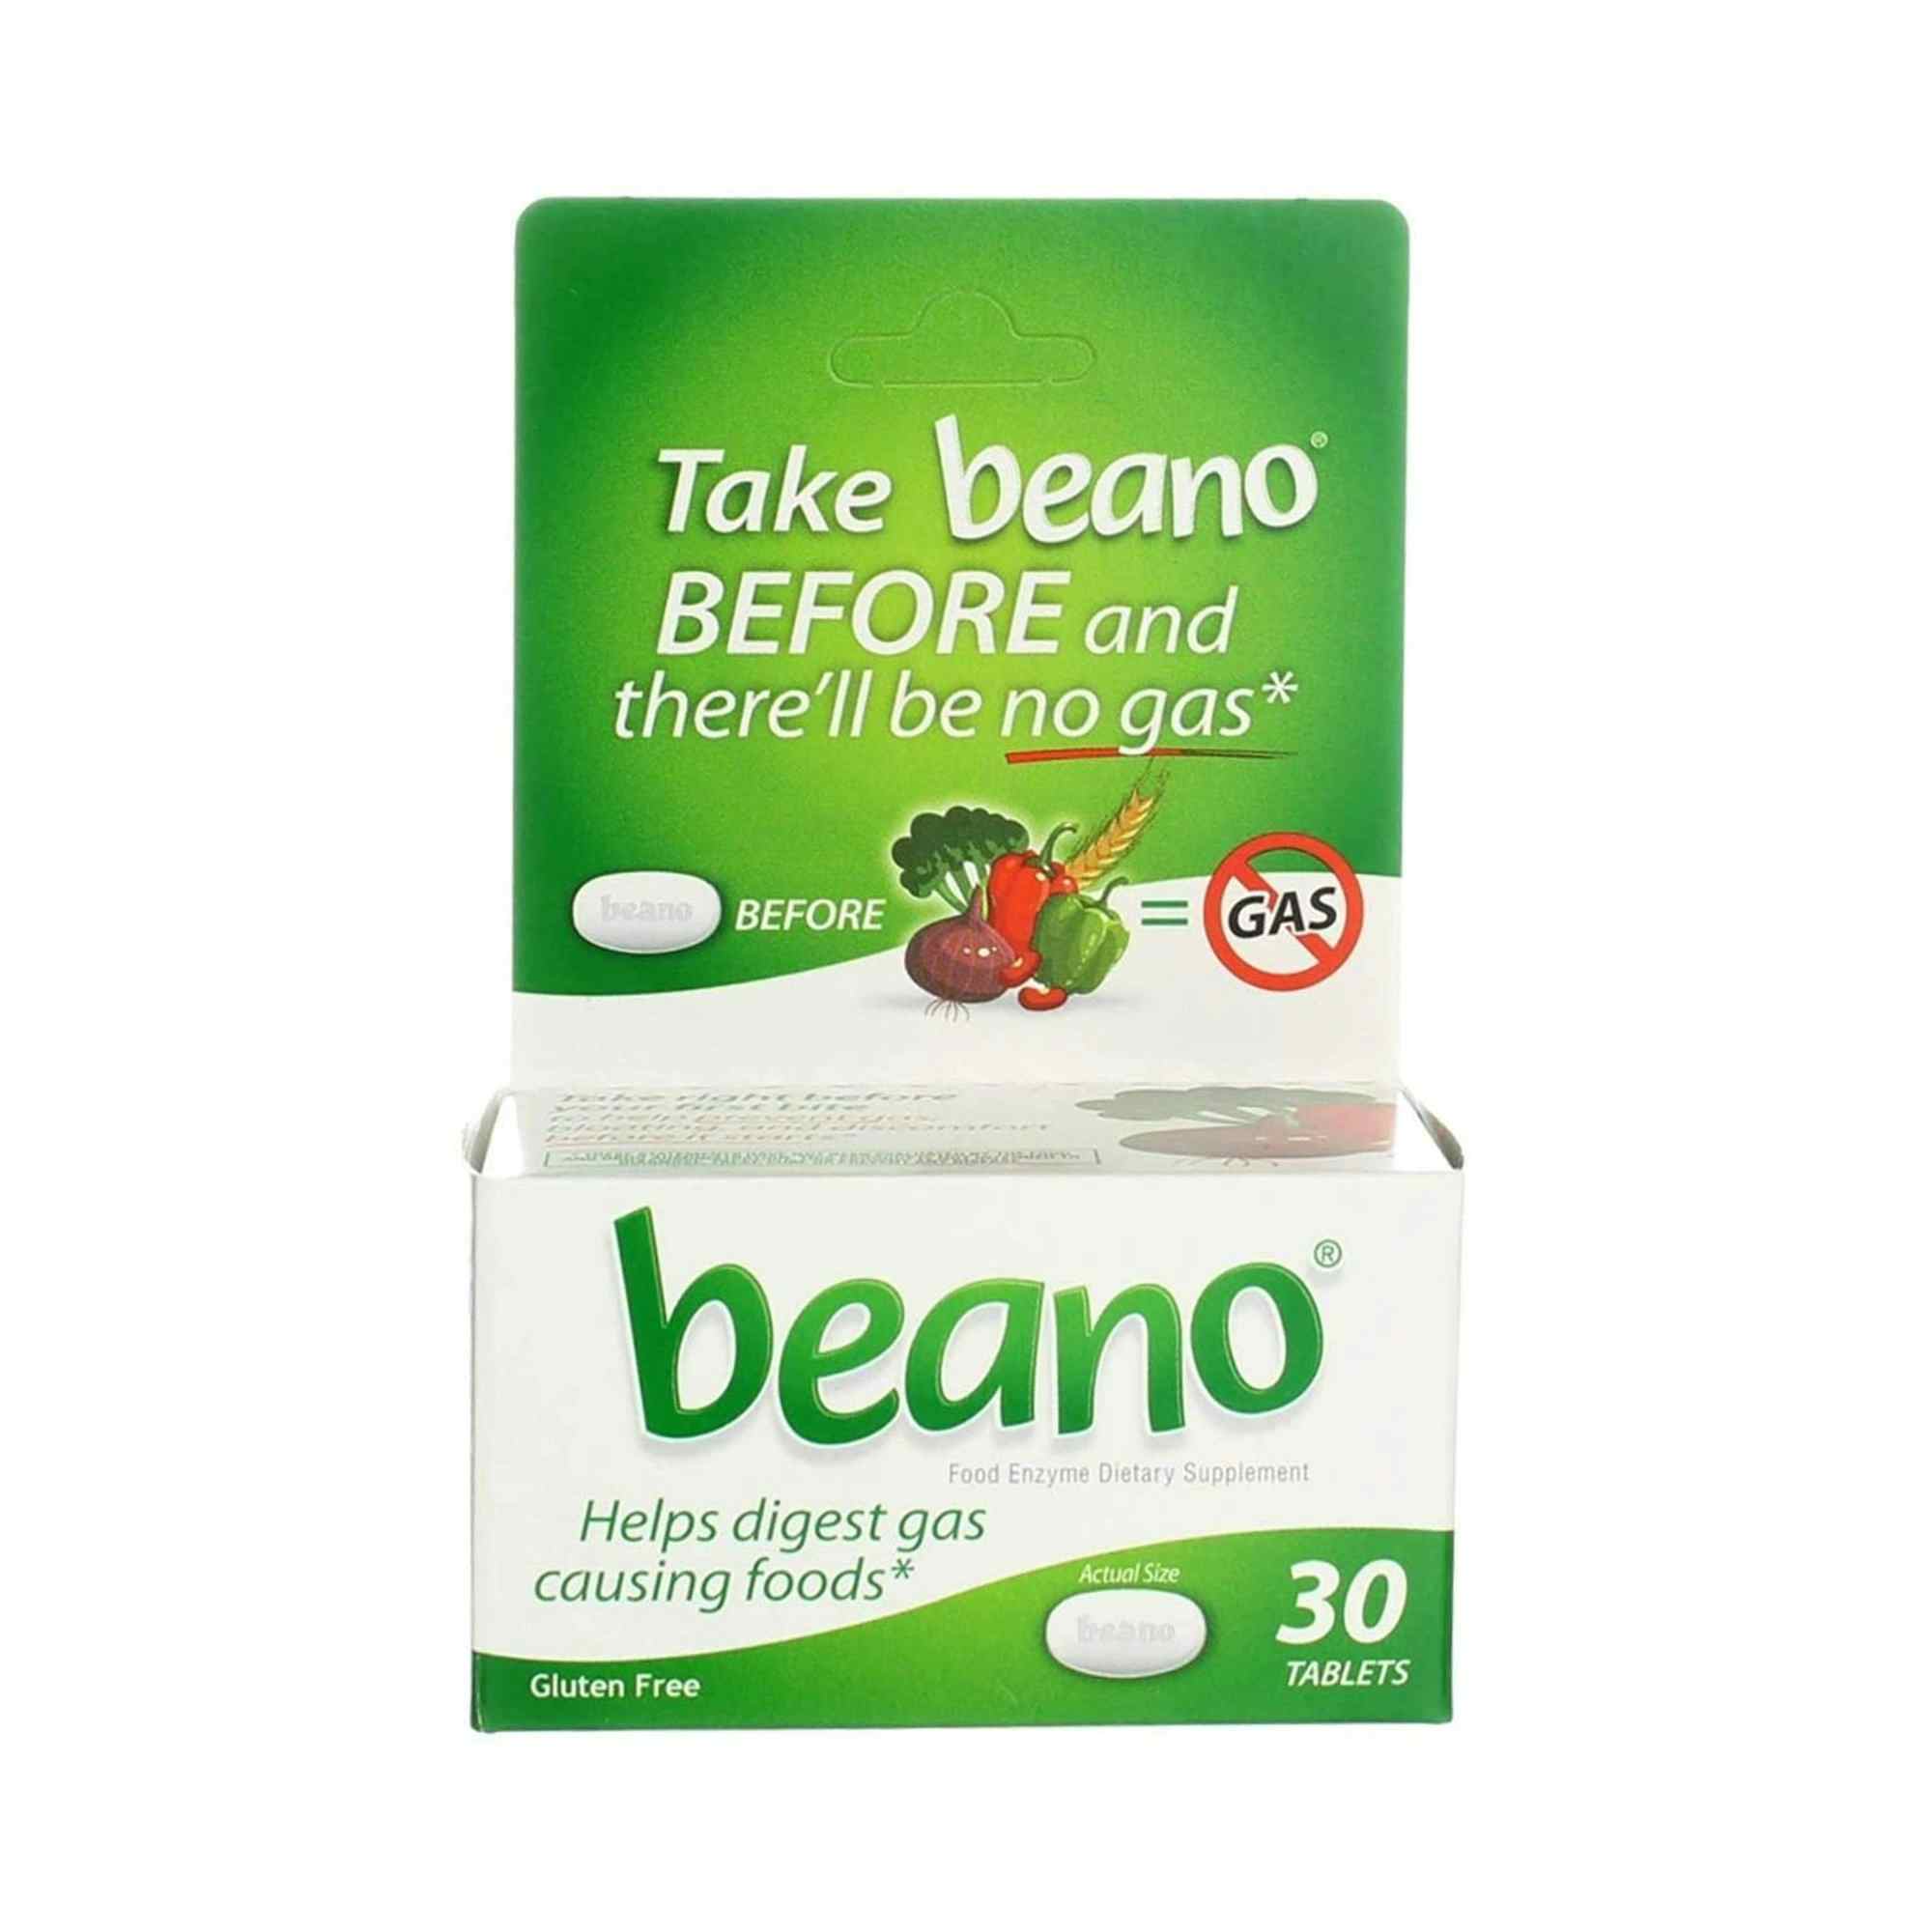 Beano Food Enzyme Dietary Supplement, 30 Tablets , 04203710304, 1 Bottle